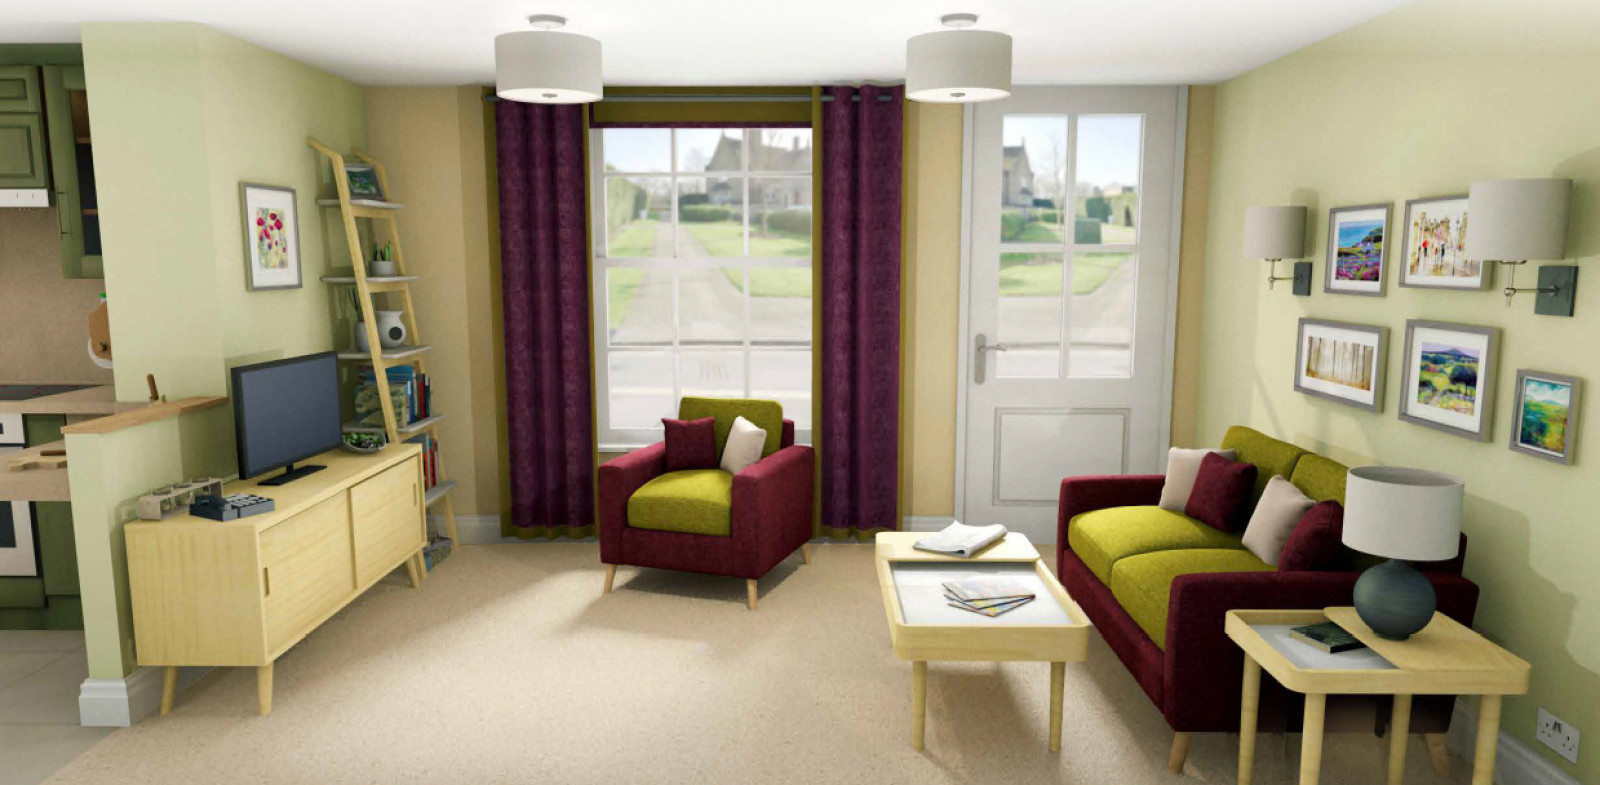 “Dementia-friendly home” supports design for indep...